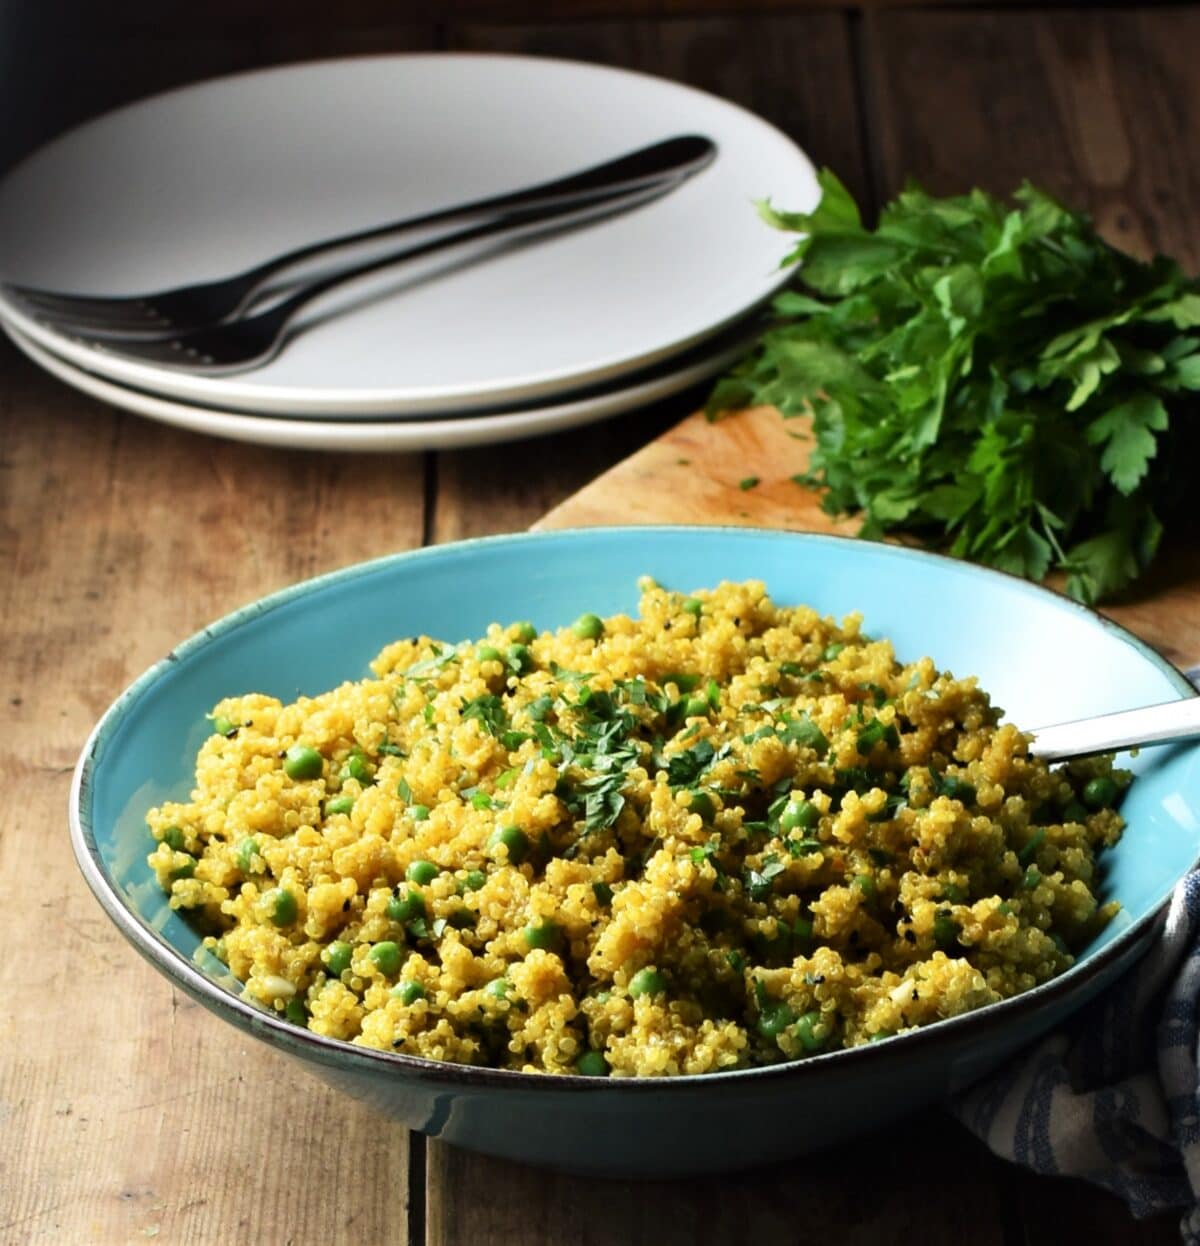 Curry quinoa with peas in blue bowl with spoon, 2 white plates with forks and fresh herbs in background.